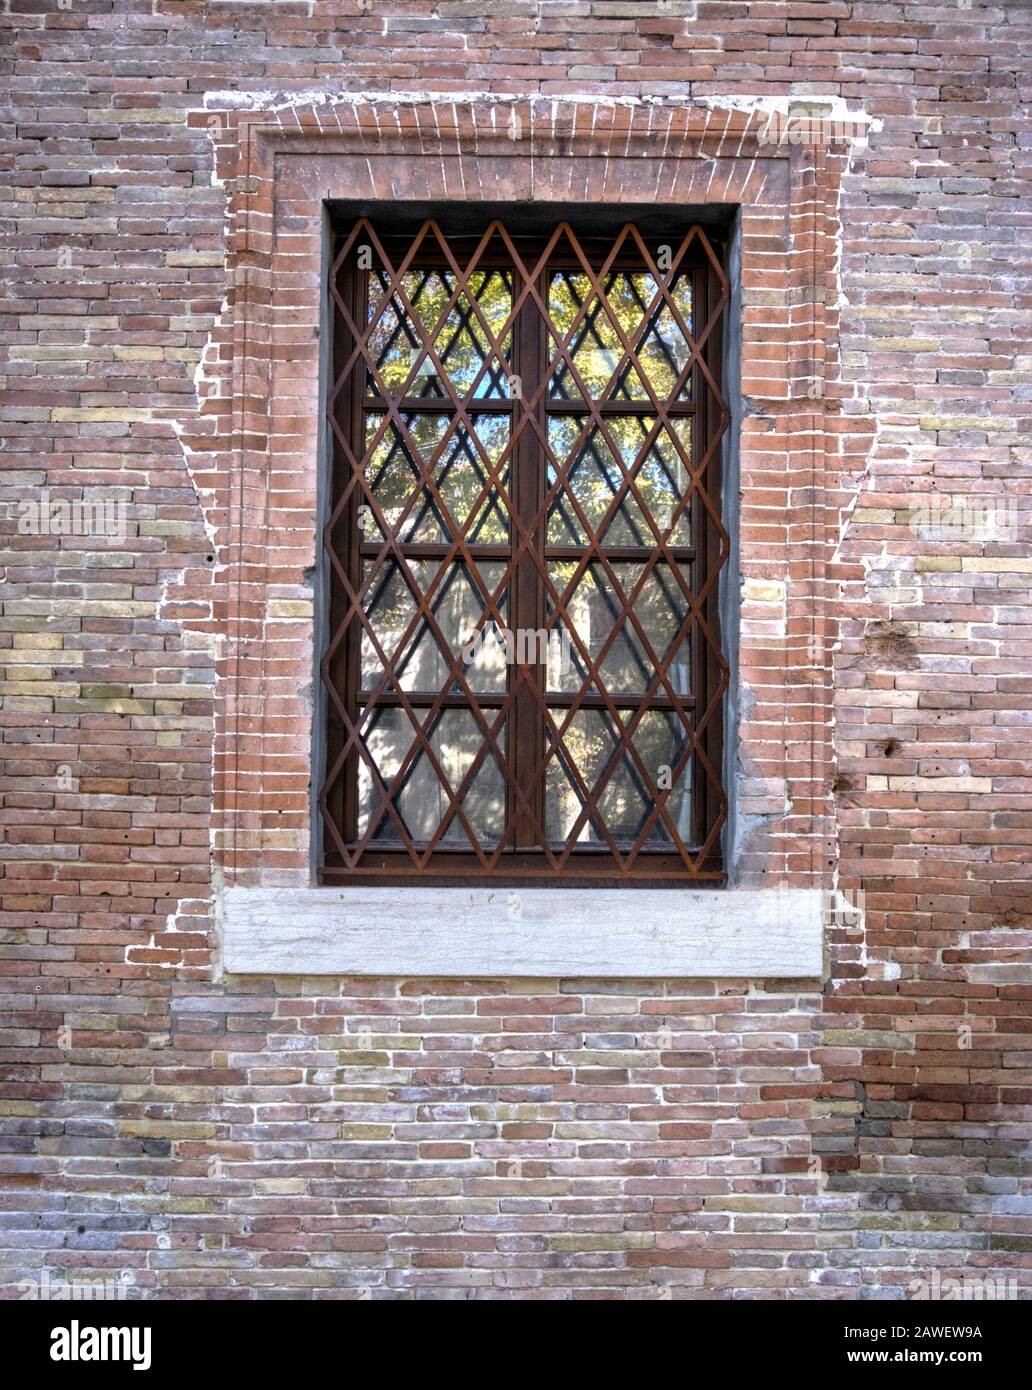 Window with grating in old masonry brick wall with repaired brick work Stock Photo